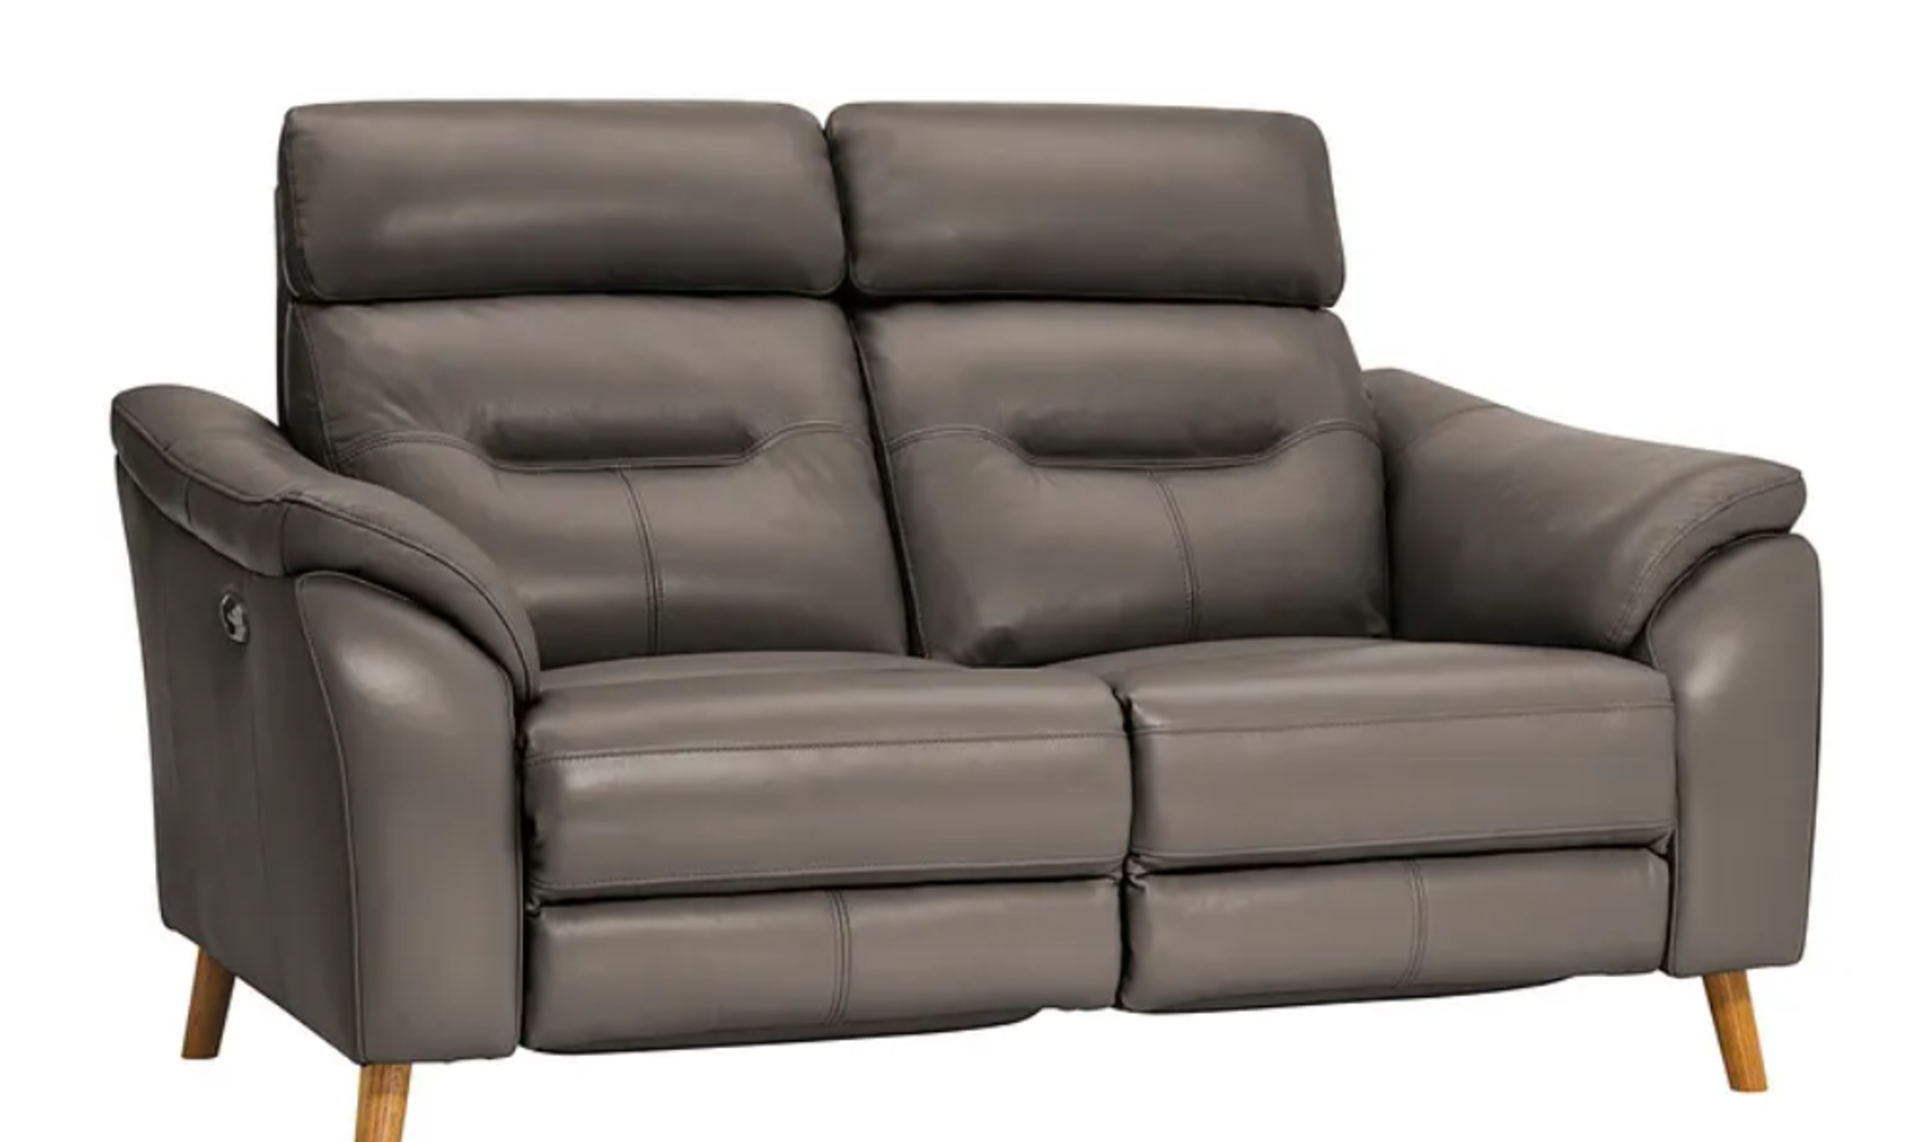 MUSE 2 Seater Electric Recliner Sofa | Grey Leather. RRP £1,699.00. Muse is a range of leather